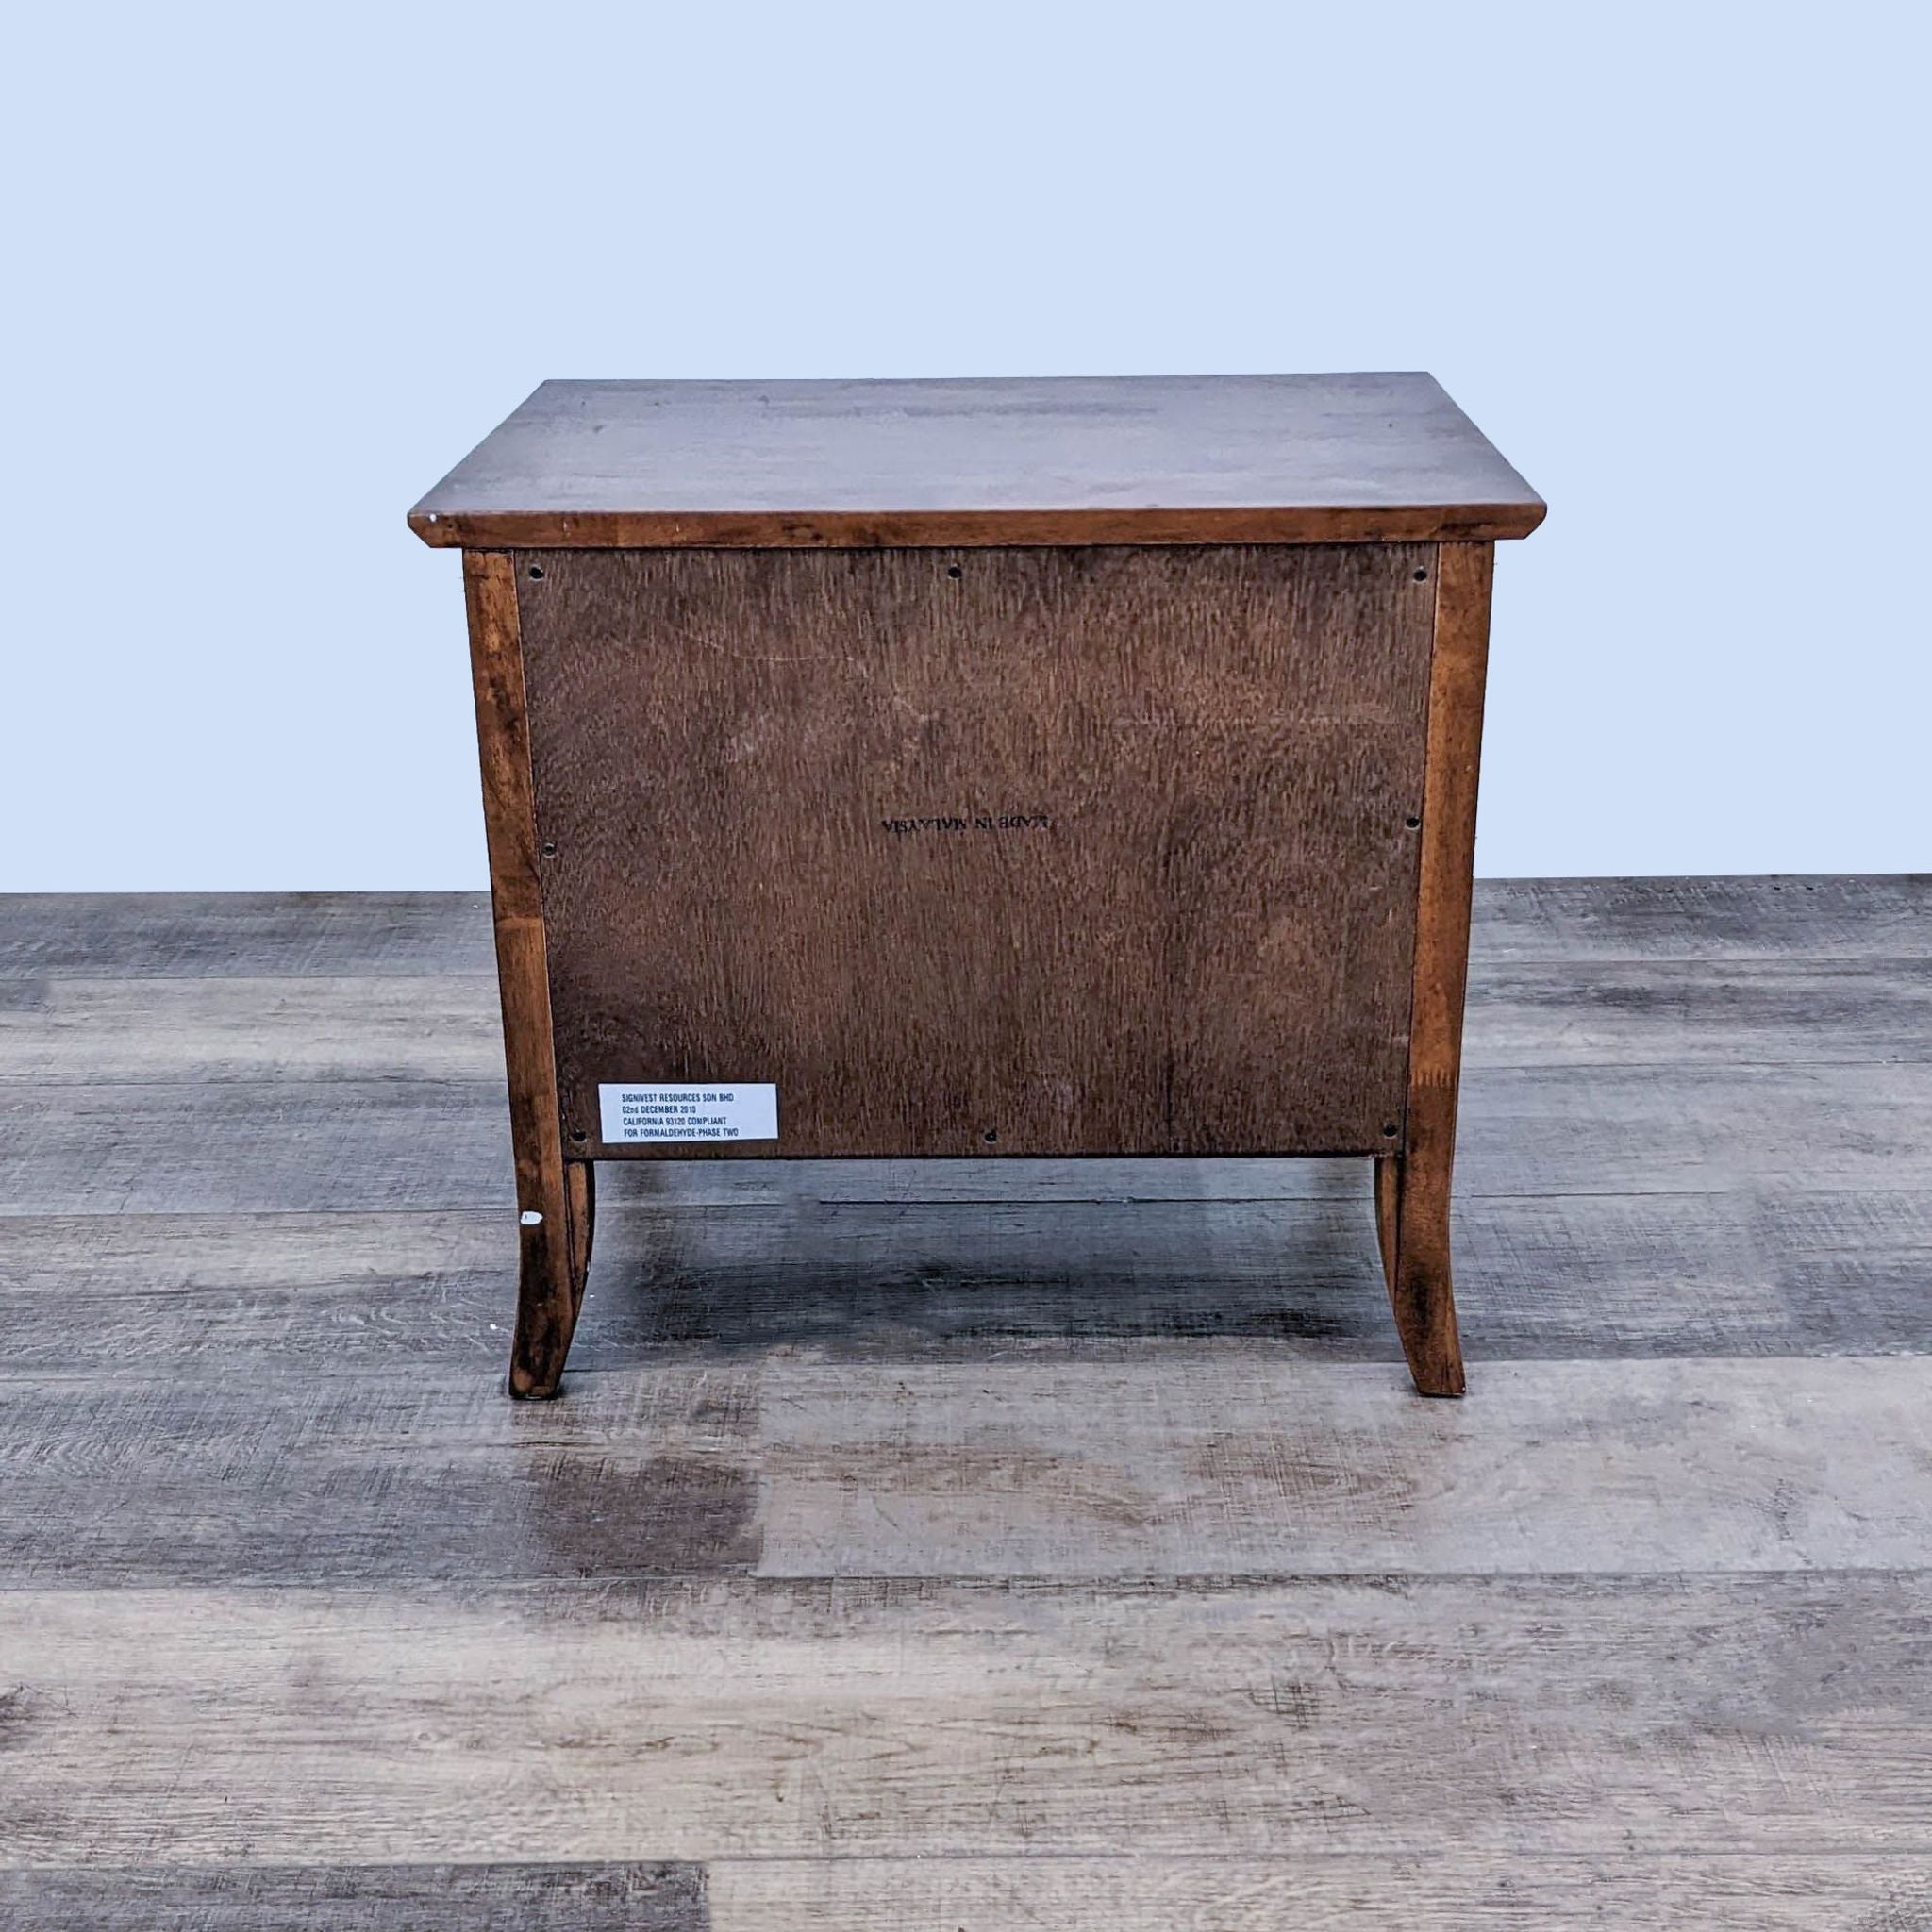 Back view of a Reperch end table with a label, showcasing craftsmanship, against a neutral backdrop.